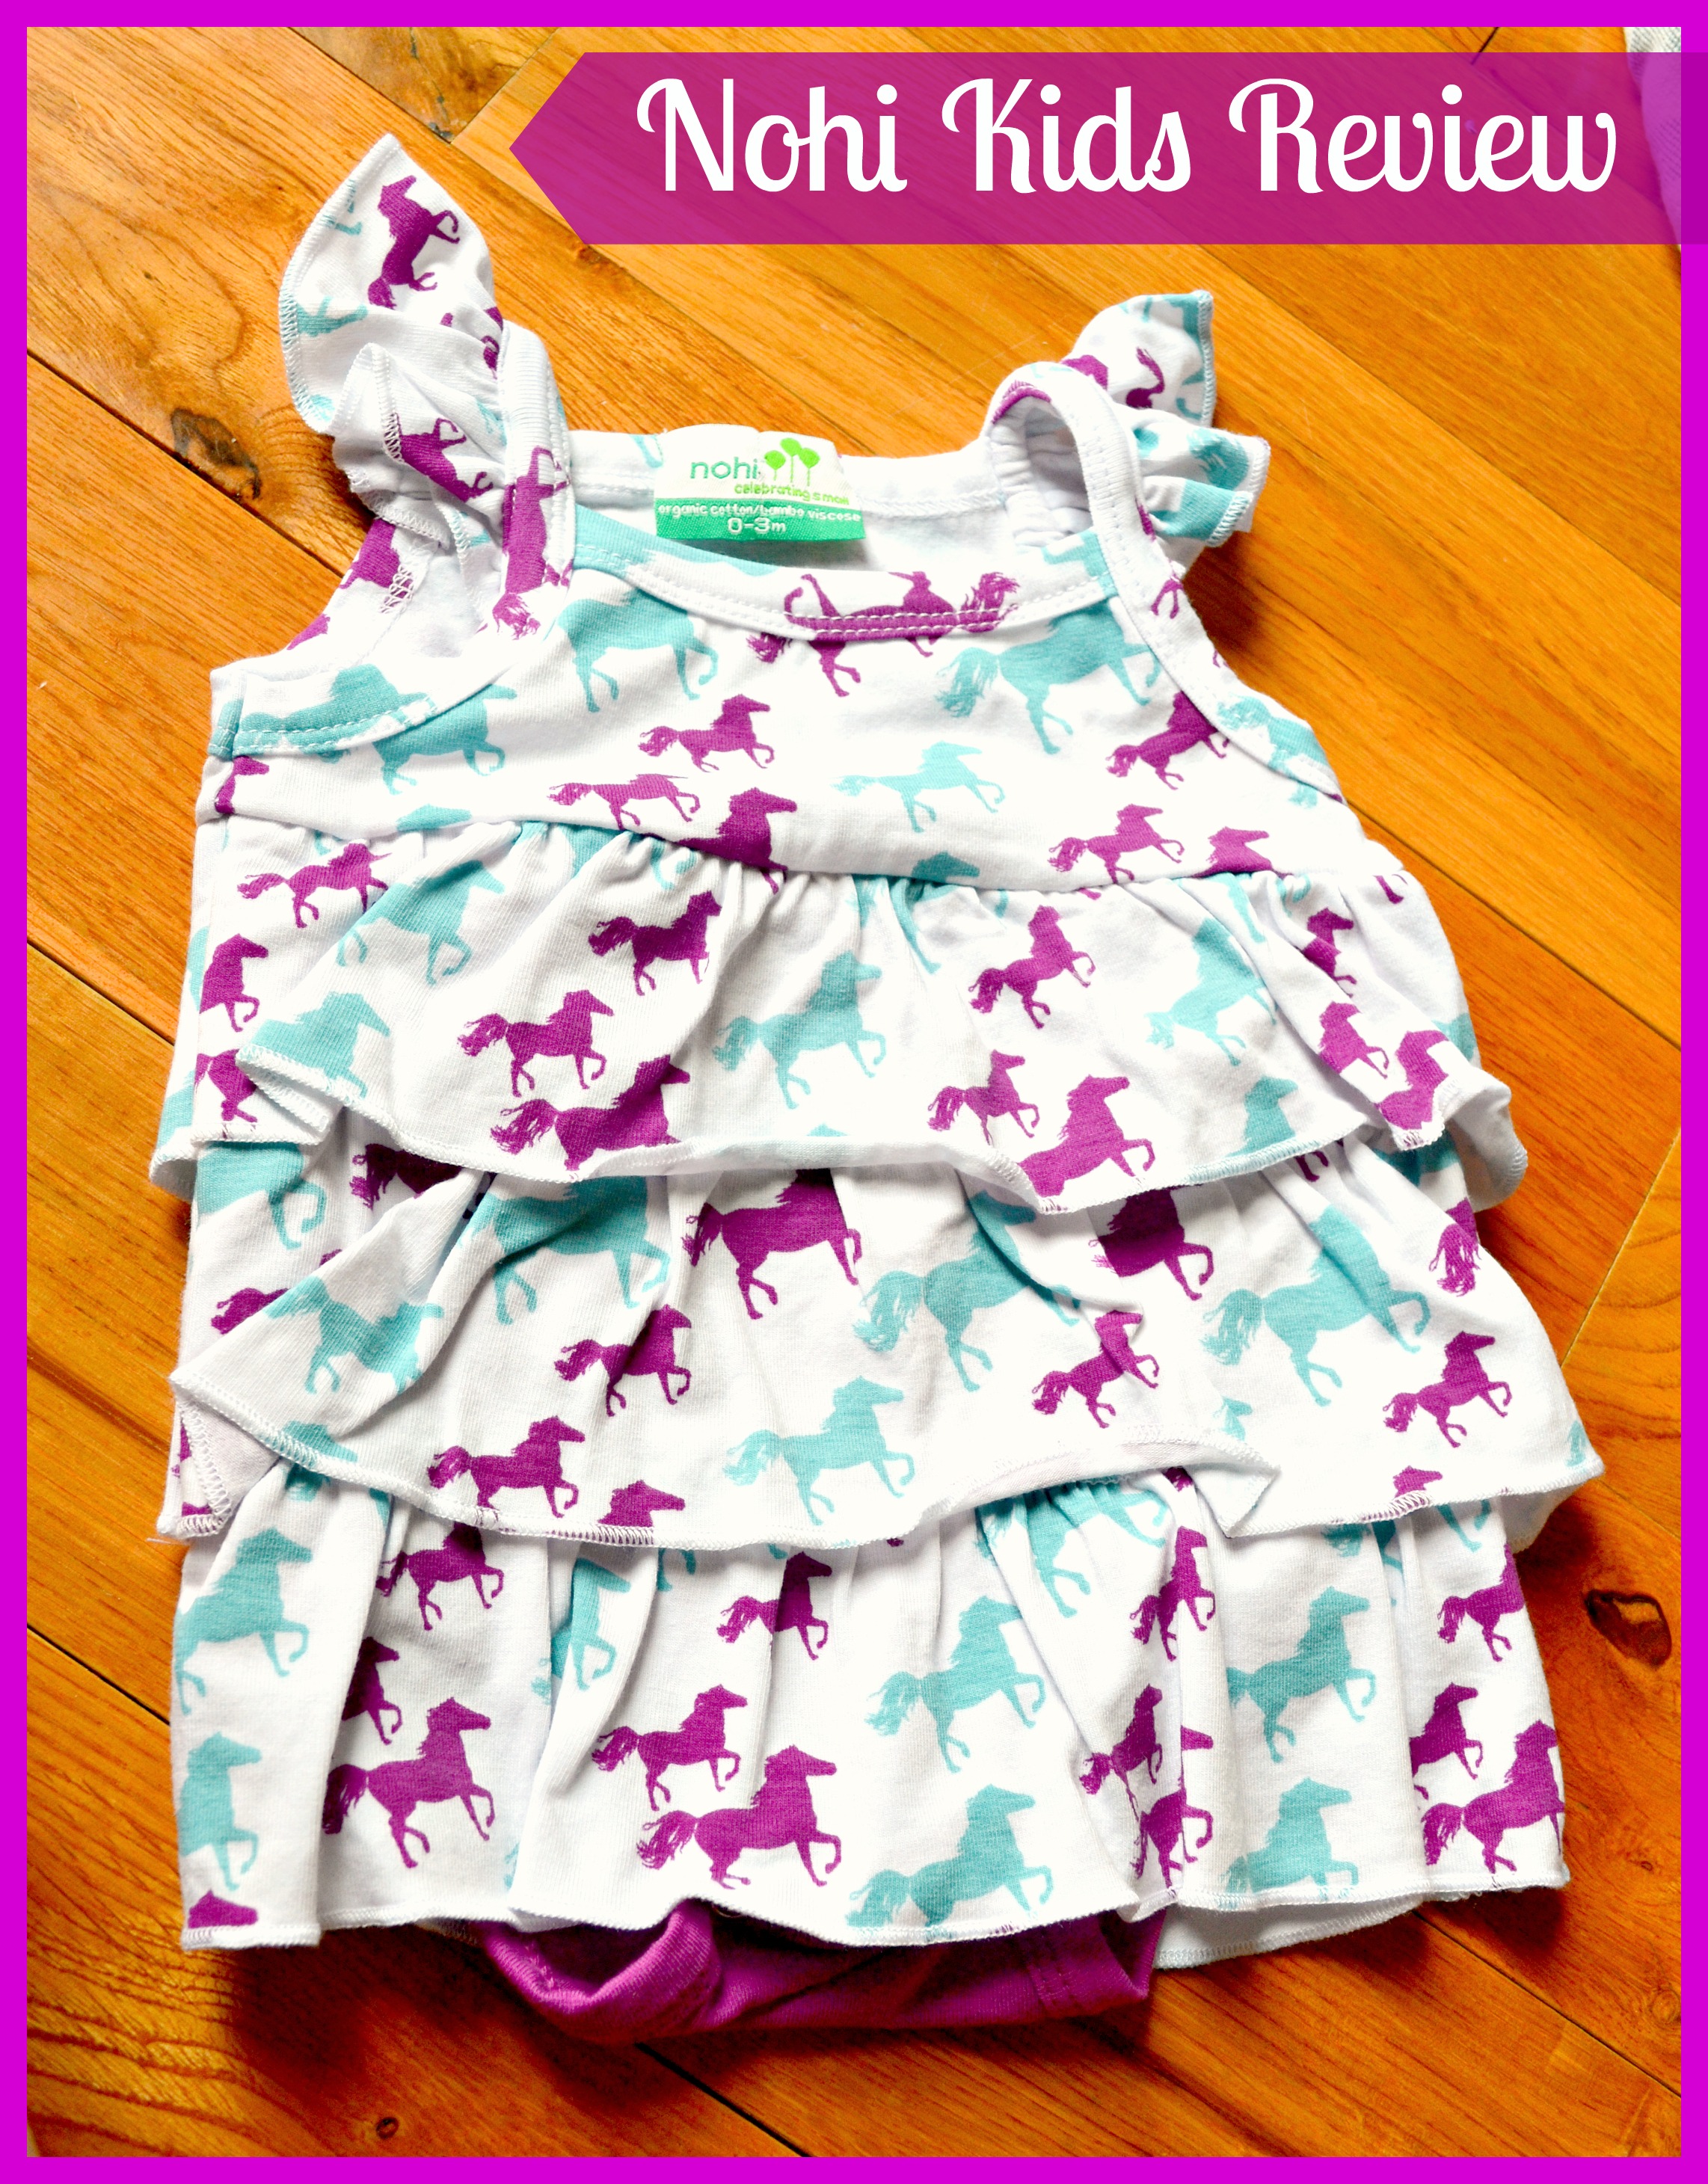 Nohi Kids Clothing Review (Getting Ready For Baby Gift Guide)